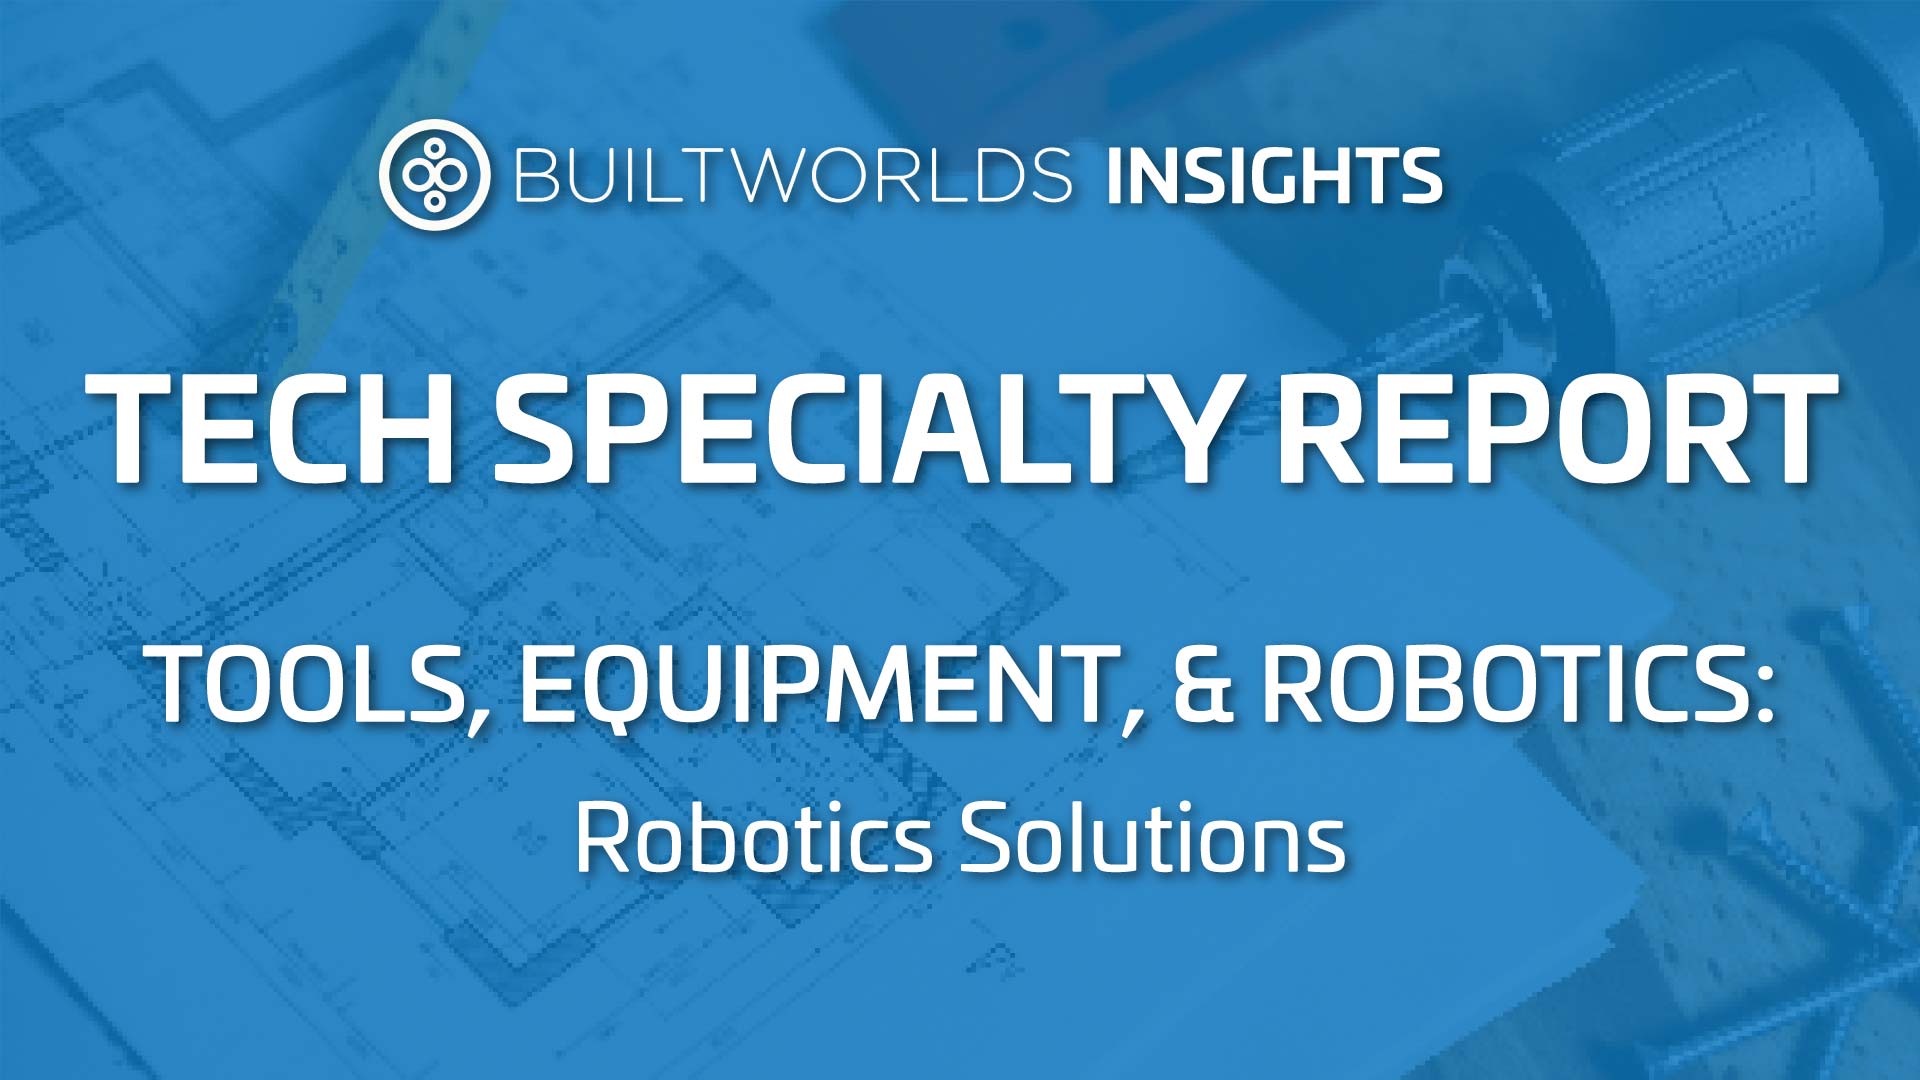 BuiltWorlds Latest Research Report on Tools, Epuipment, and Robotics provides deeper insights and comparisons of the solution emerging in this part of the Built World tech sector.